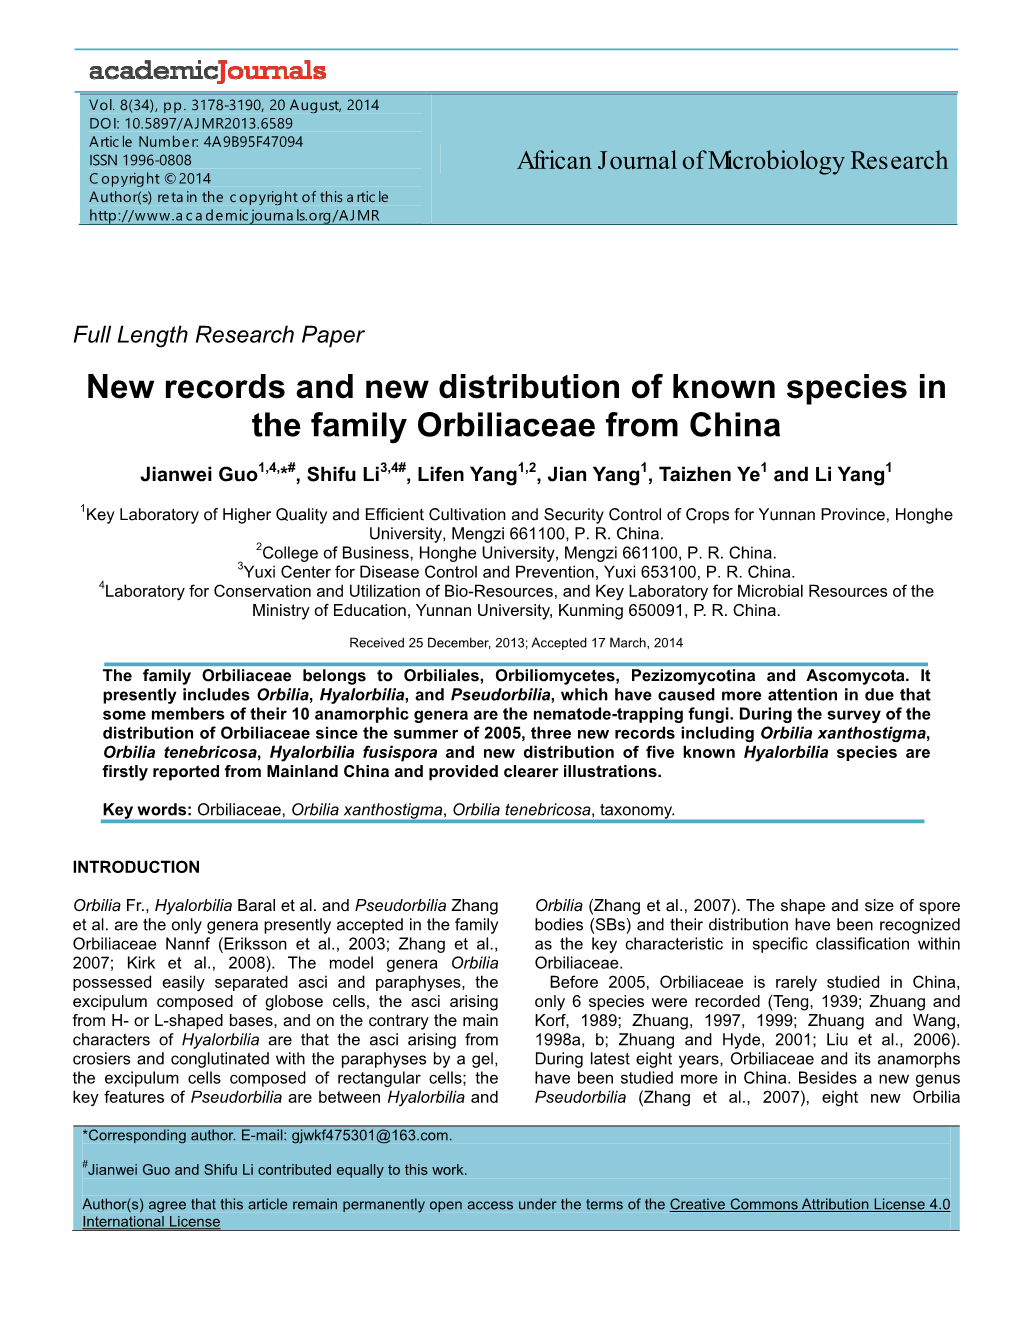 New Records and New Distribution of Known Species in the Family Orbiliaceae from China